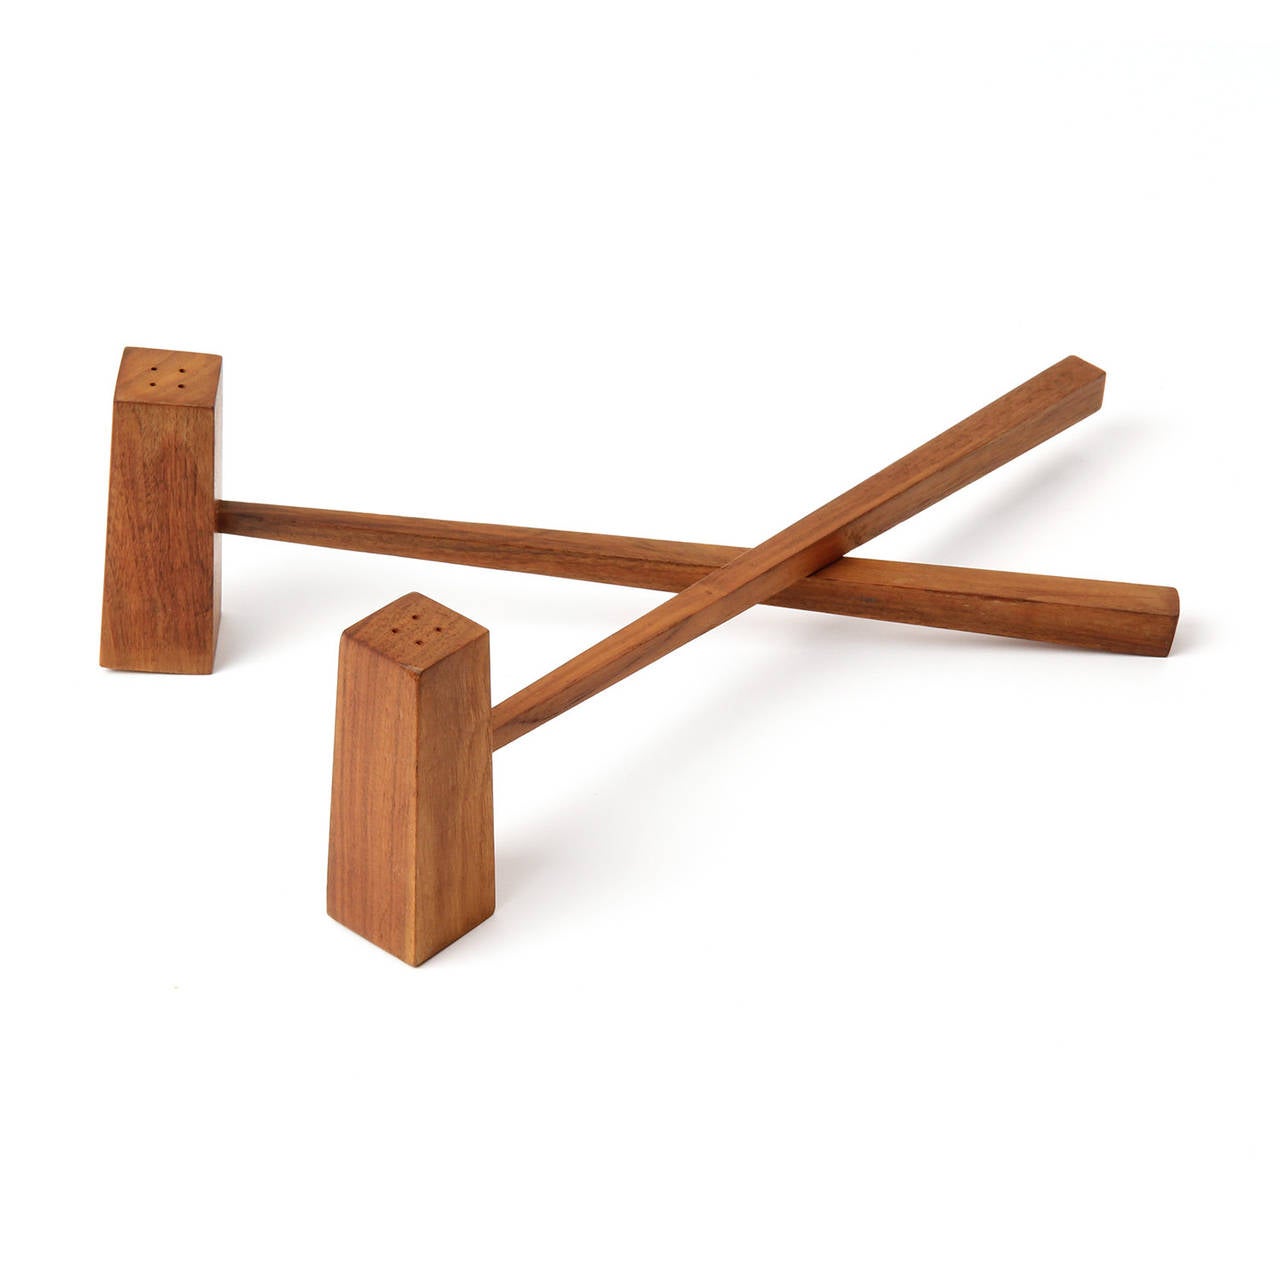 An unusual and finely crafted pair of salt and pepper shakers of tapering rectangular form attached to solid teak tapered squared handles.